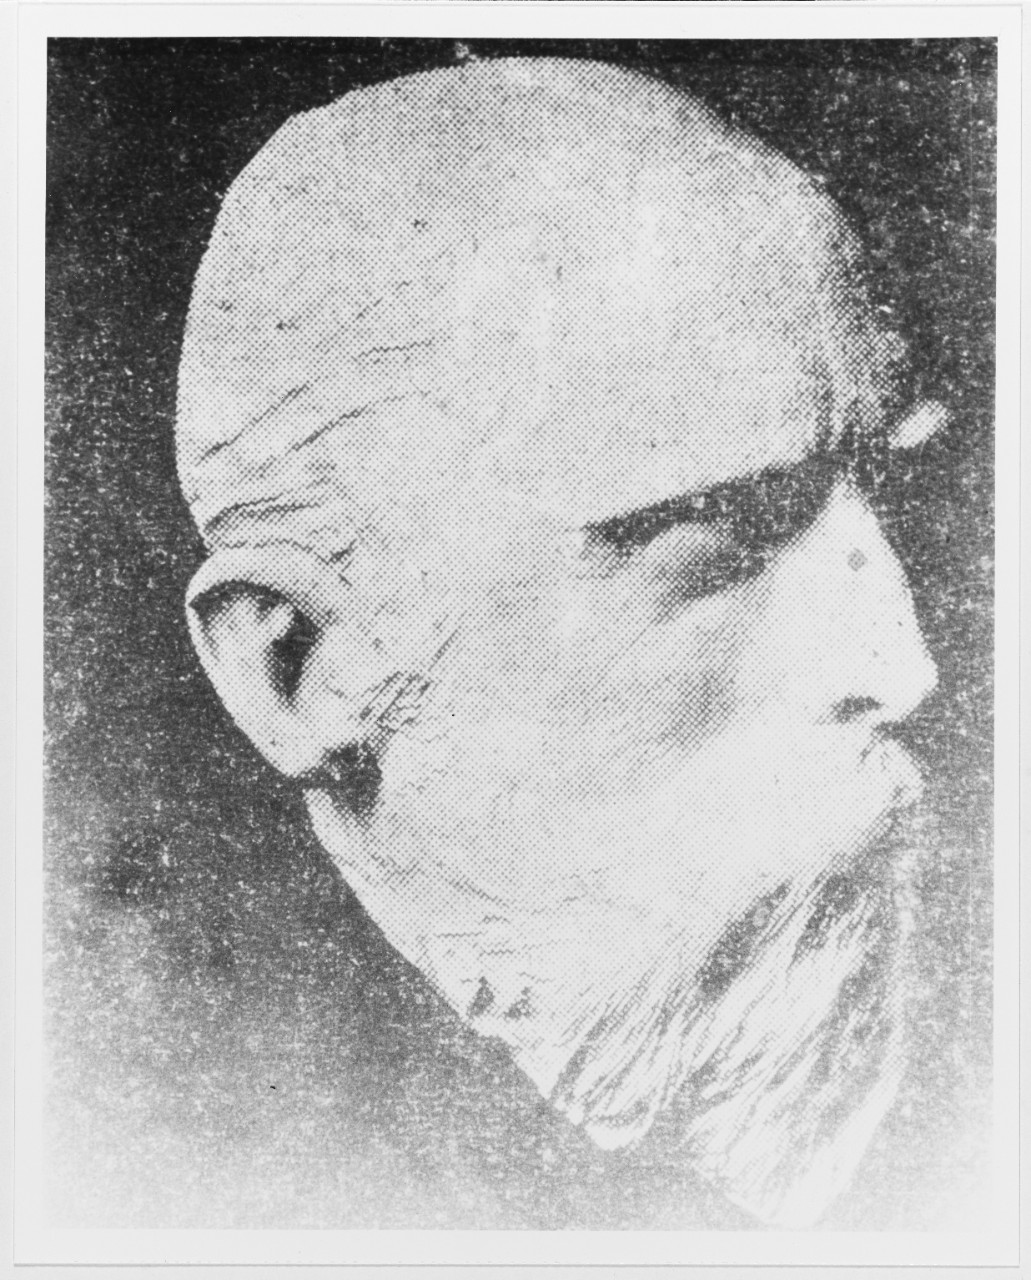 Death mask of Rear Admiral William T. Sampson, USN